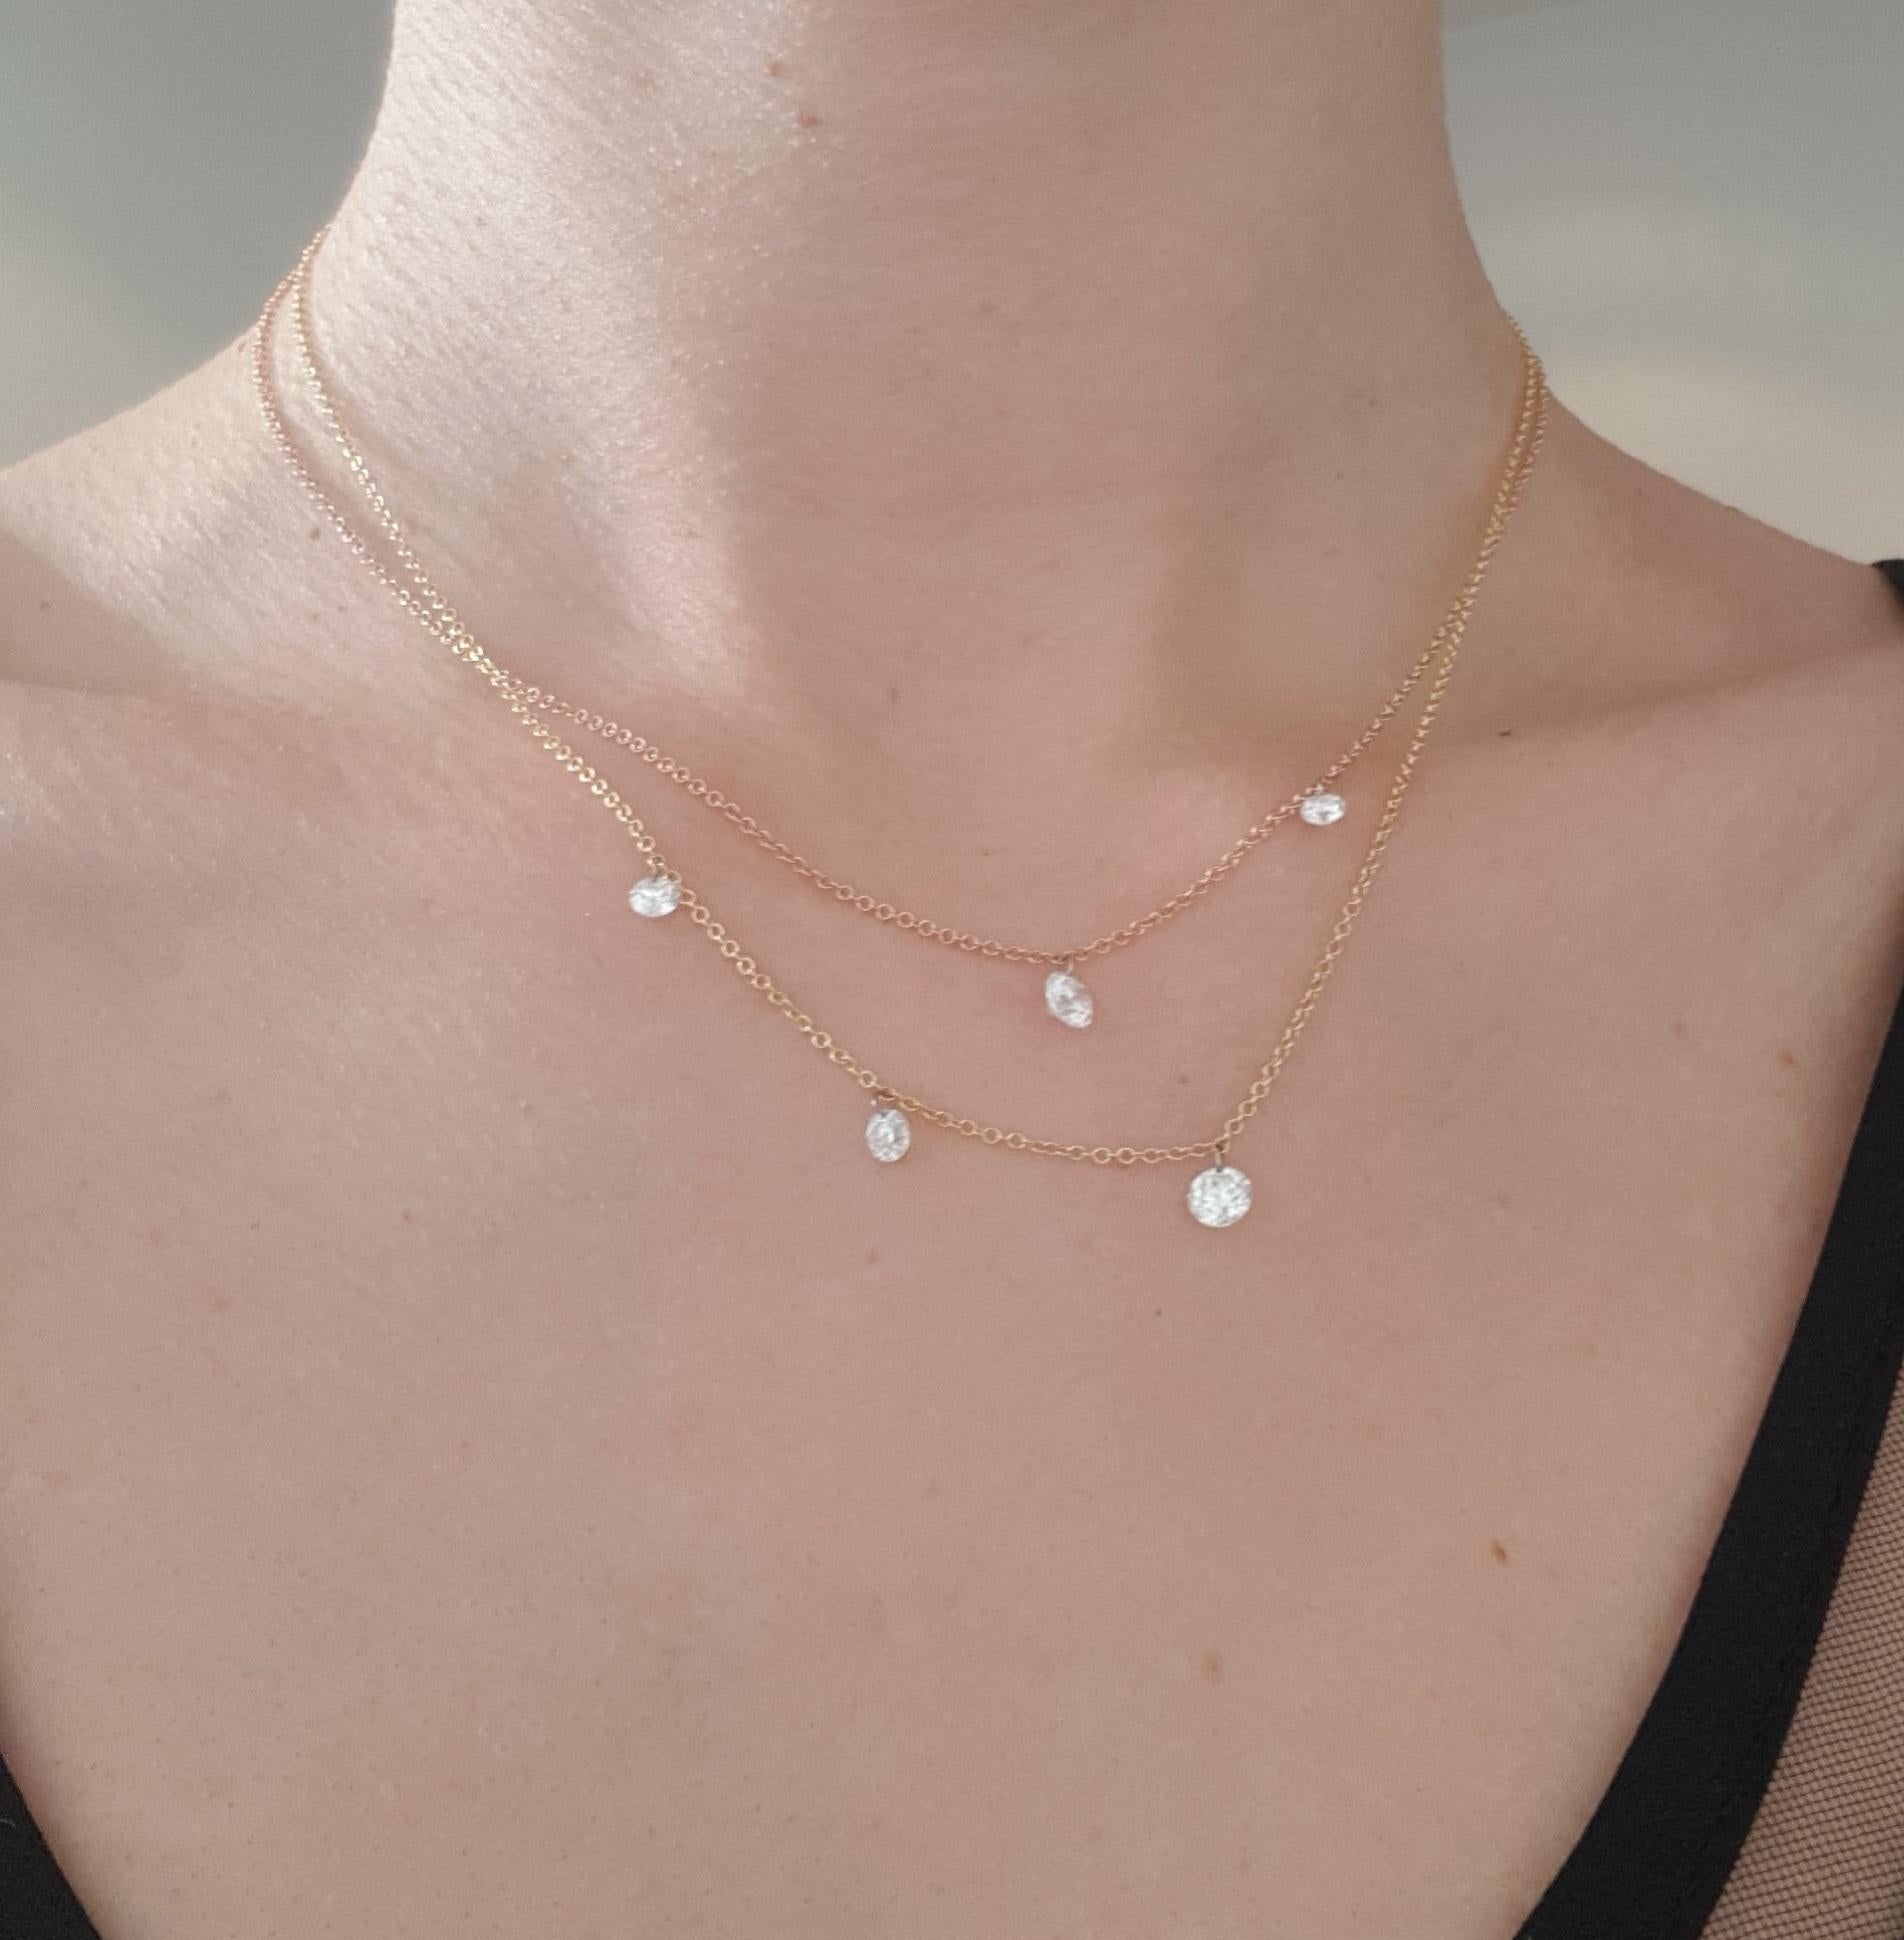 18k gold chain with 3 brillant cut nude diamonds weighing approximately 0.65 cts.
Can be made in any gold color (white, black, yellow or rose) and in any chain length.